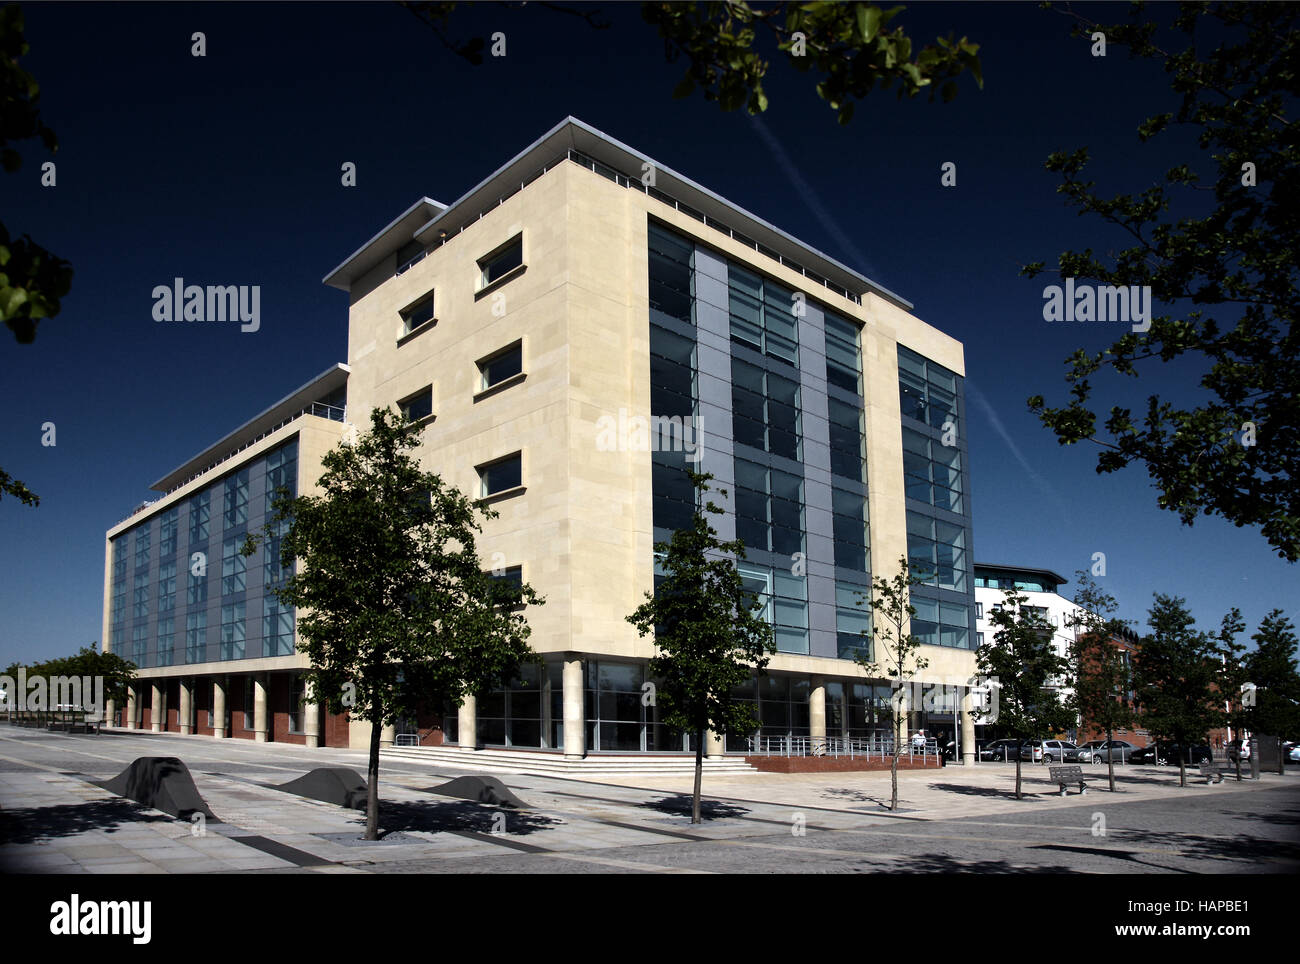 2 Humber Quays Wellington Street West Kingston Upon Hull  office block, glass and steel construction Stock Photo